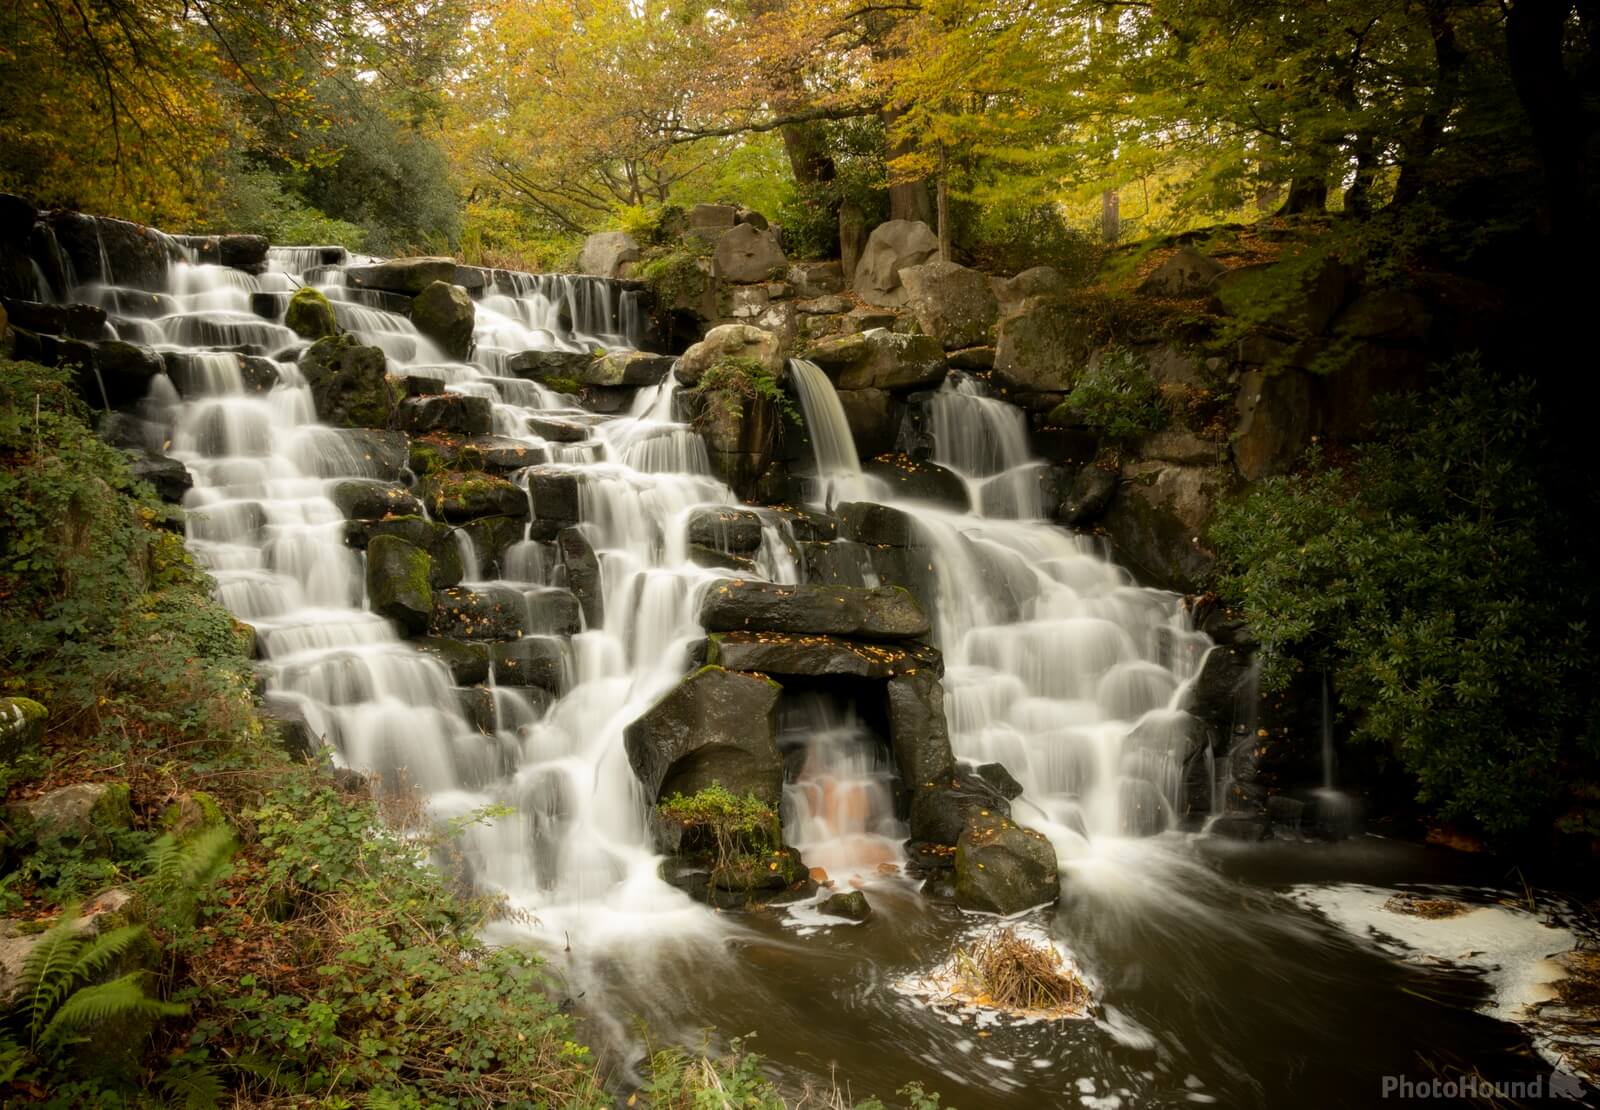 Image of Virgnia Water Lake & Cascade by Richard Joiner